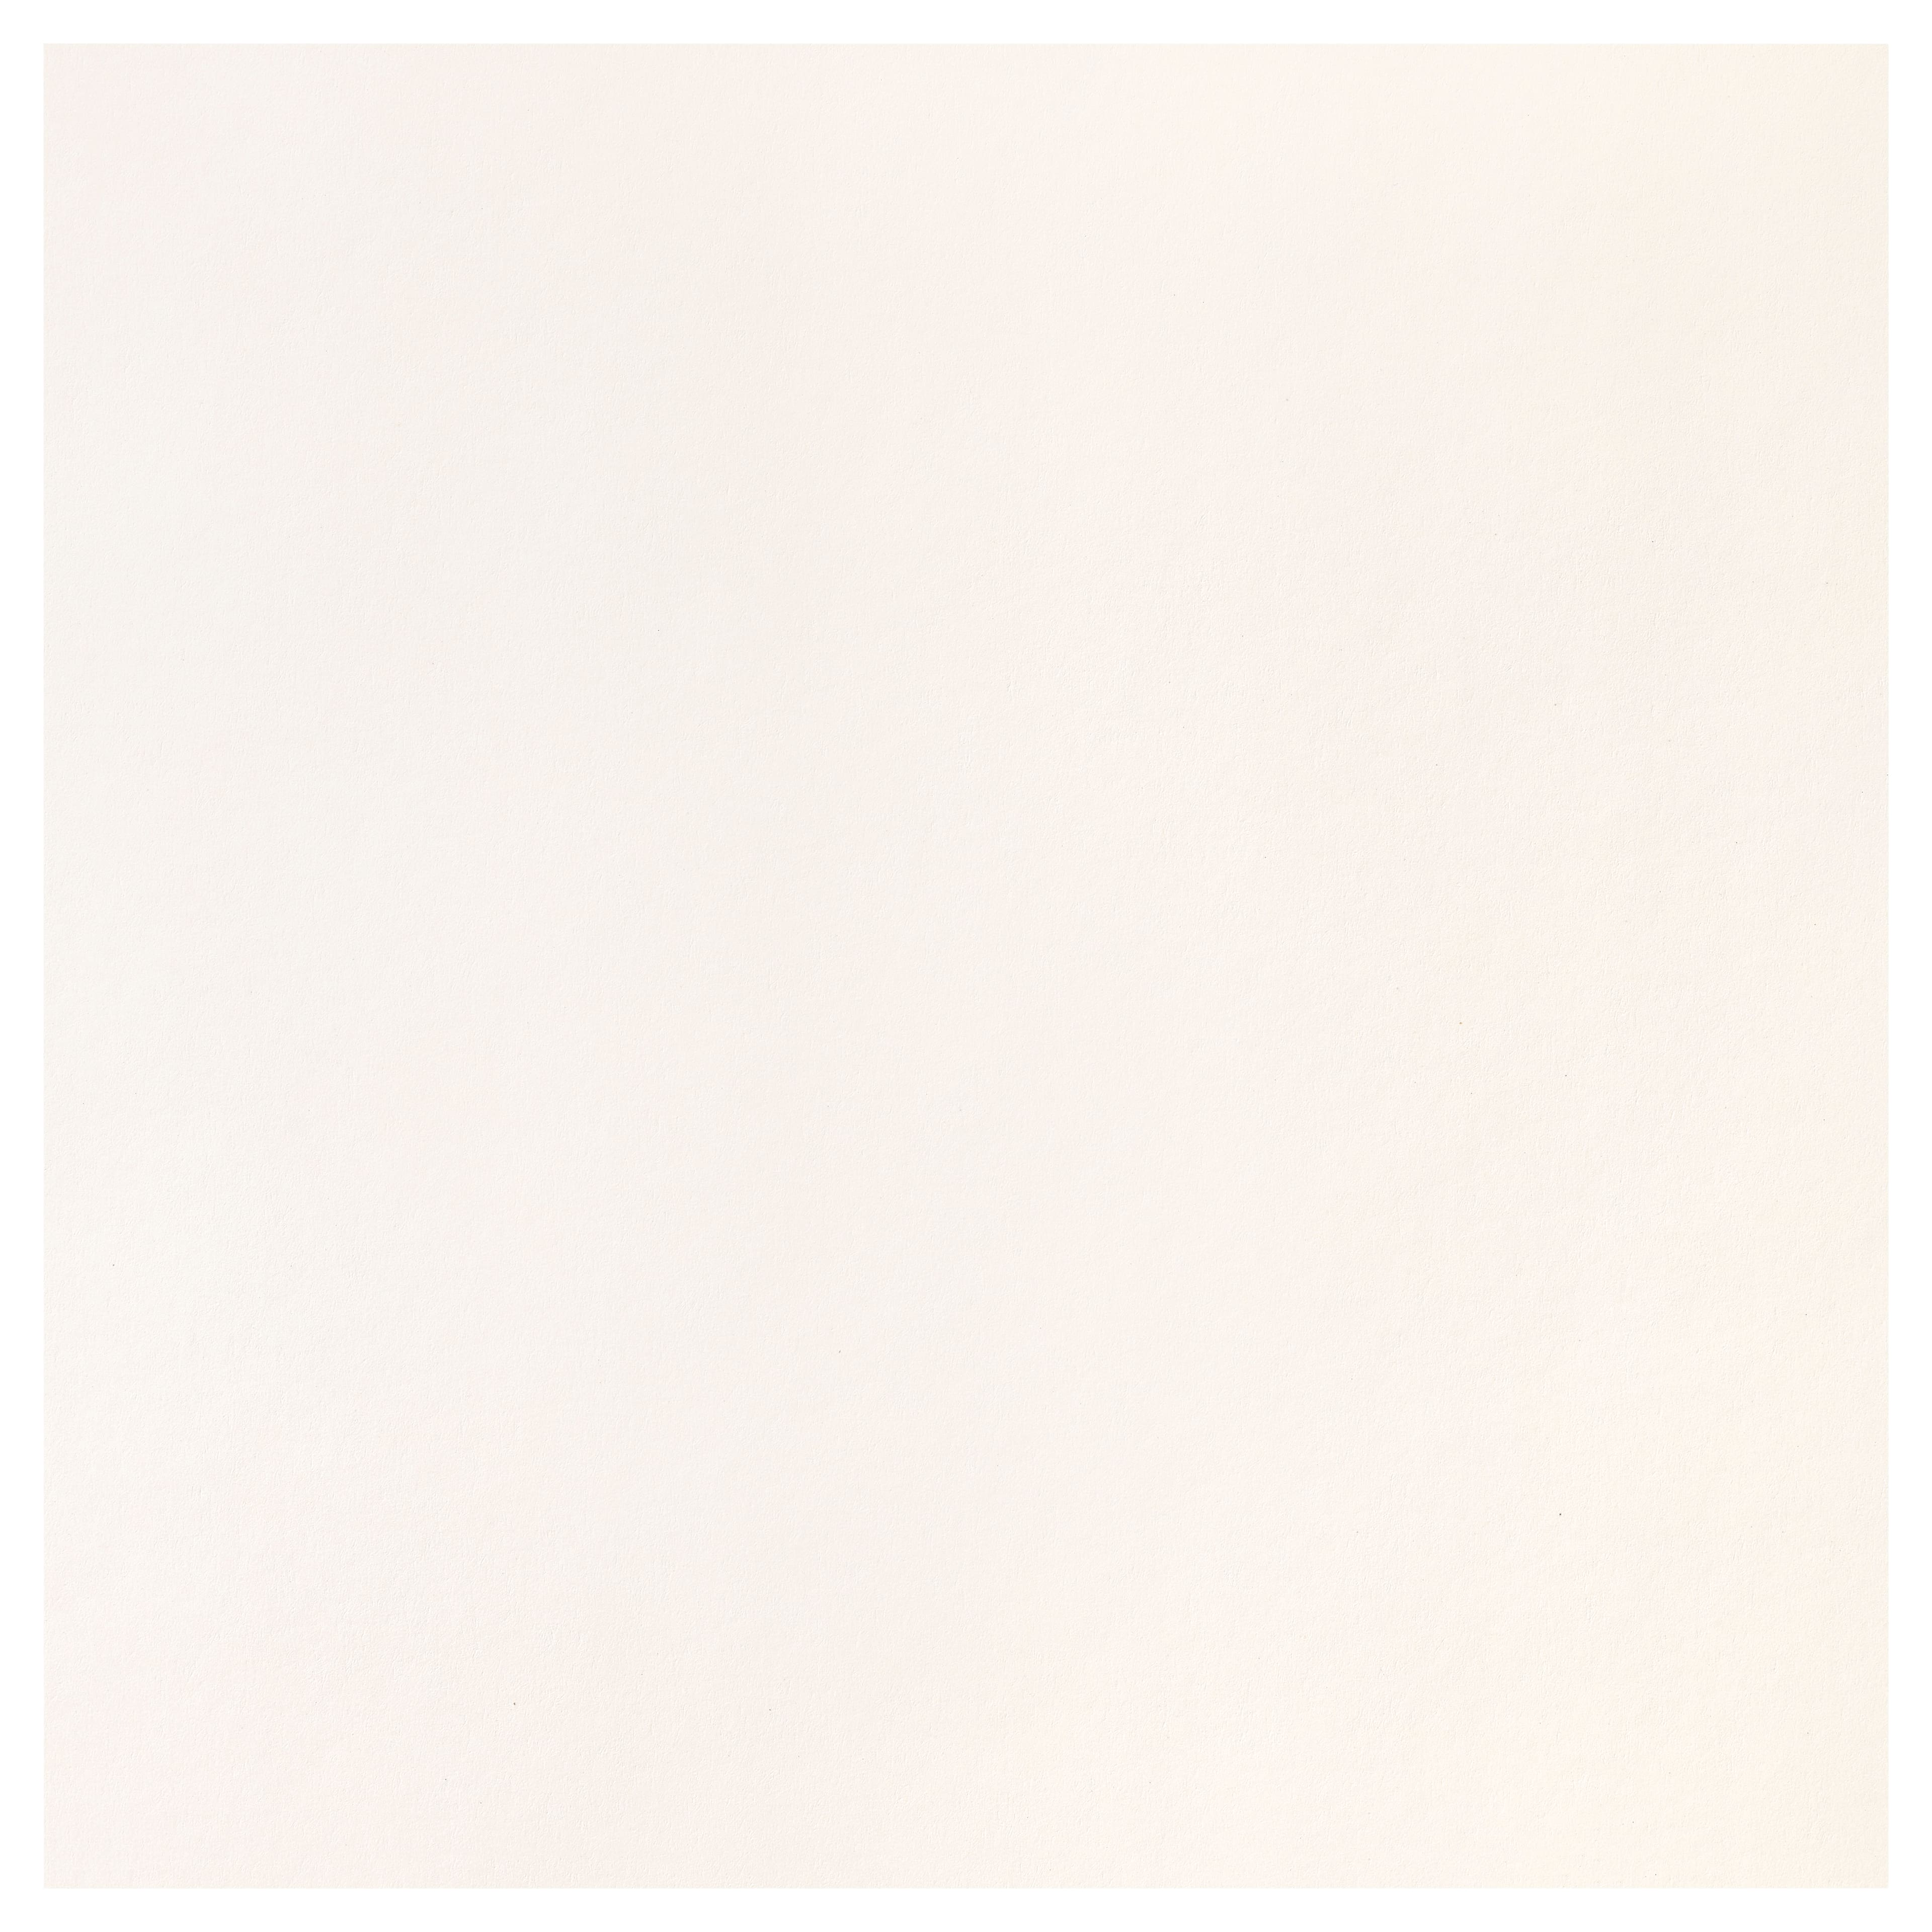 12 Packs: 100 ct. (1,200 total) White 6 x 6 Cardstock Paper by